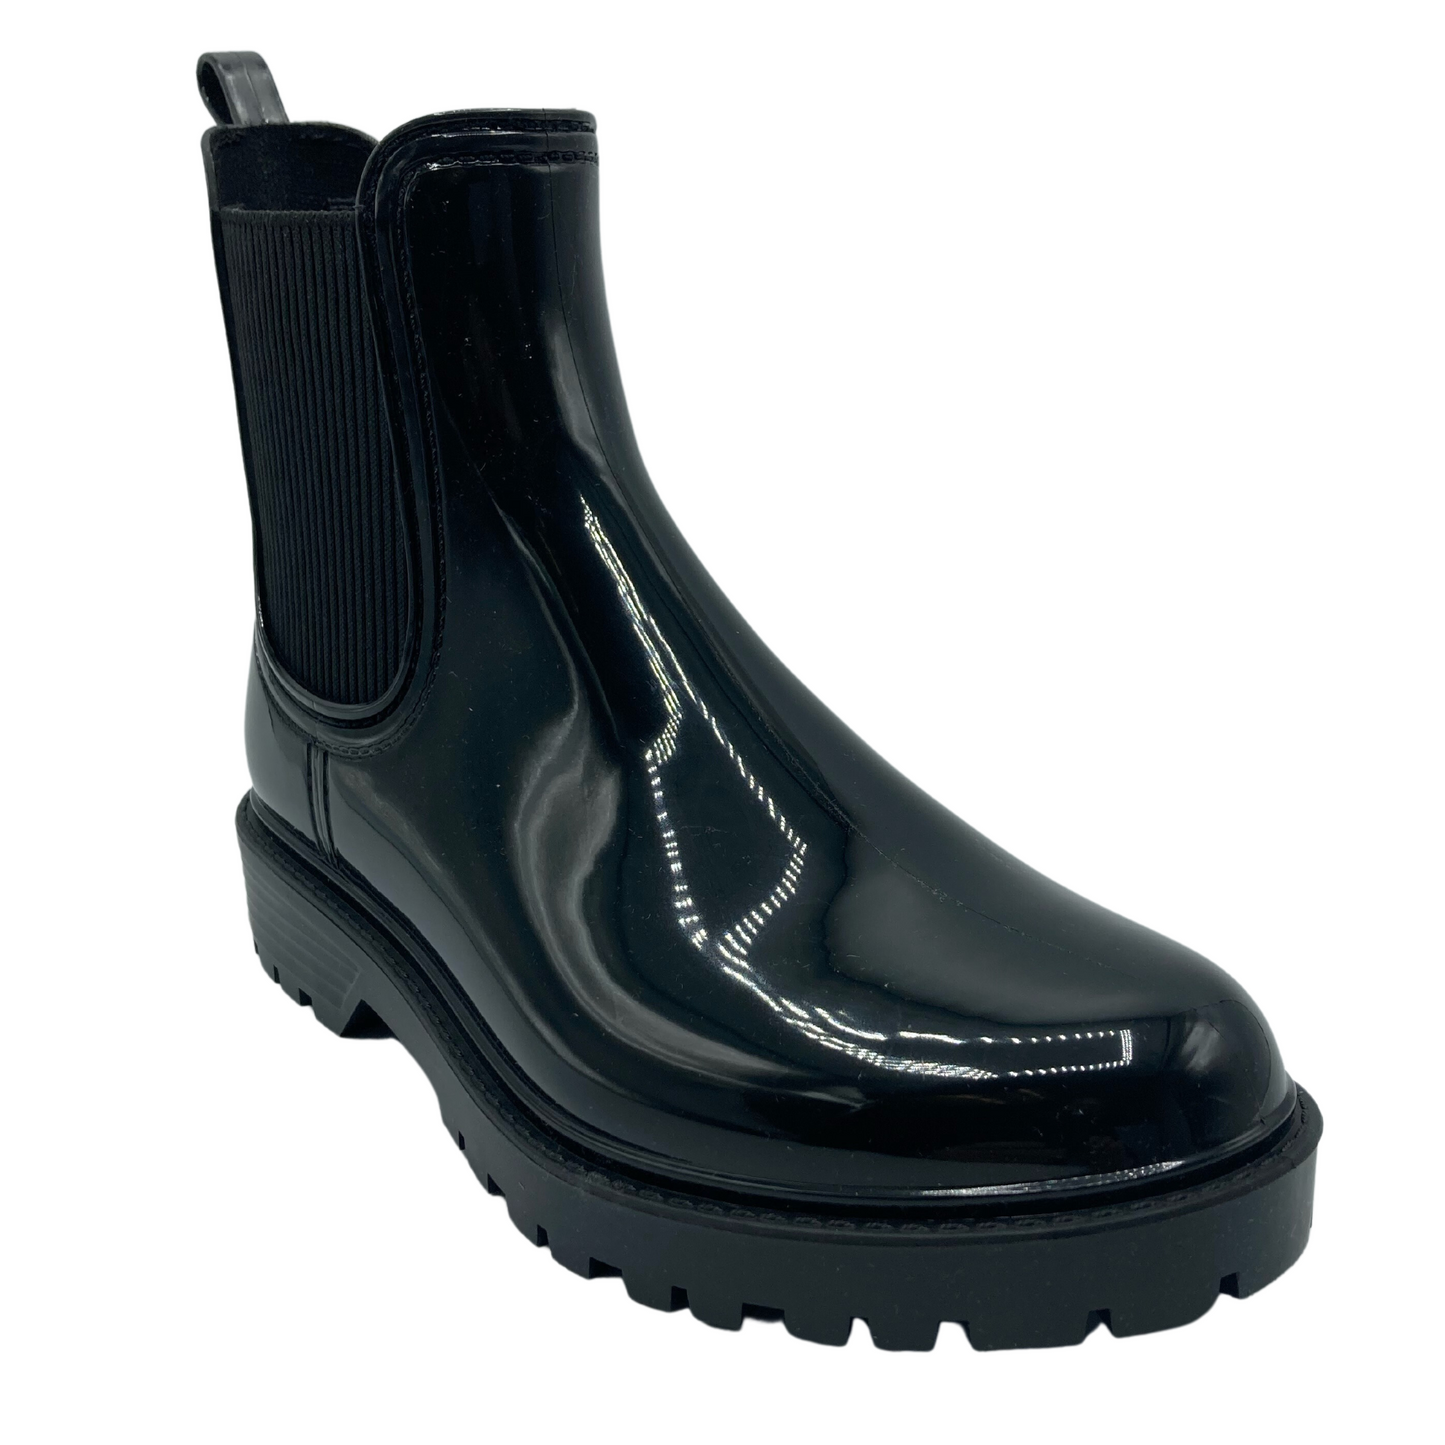 45 degree angled view of short black glossy rain boot with elastic sides and rubber outsole